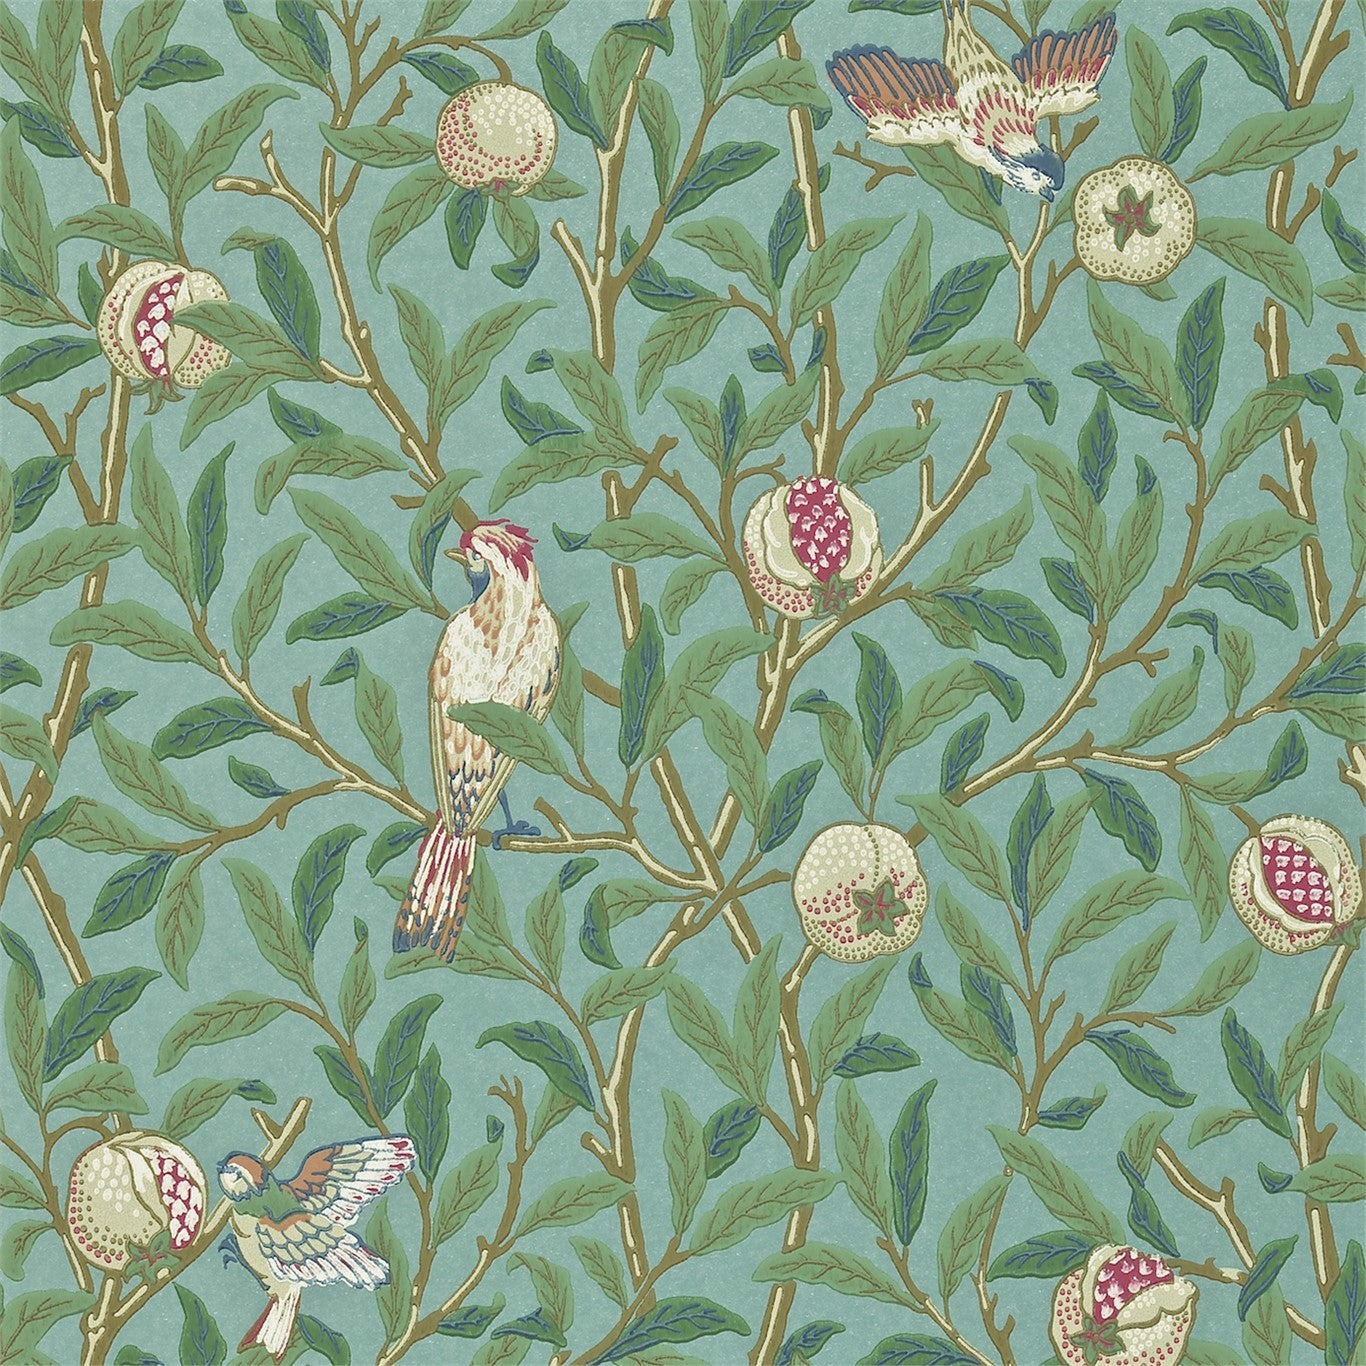 Bird & Pomegranate Turquoise/Coral Wallpaper DMCR216453 by Morris & Co